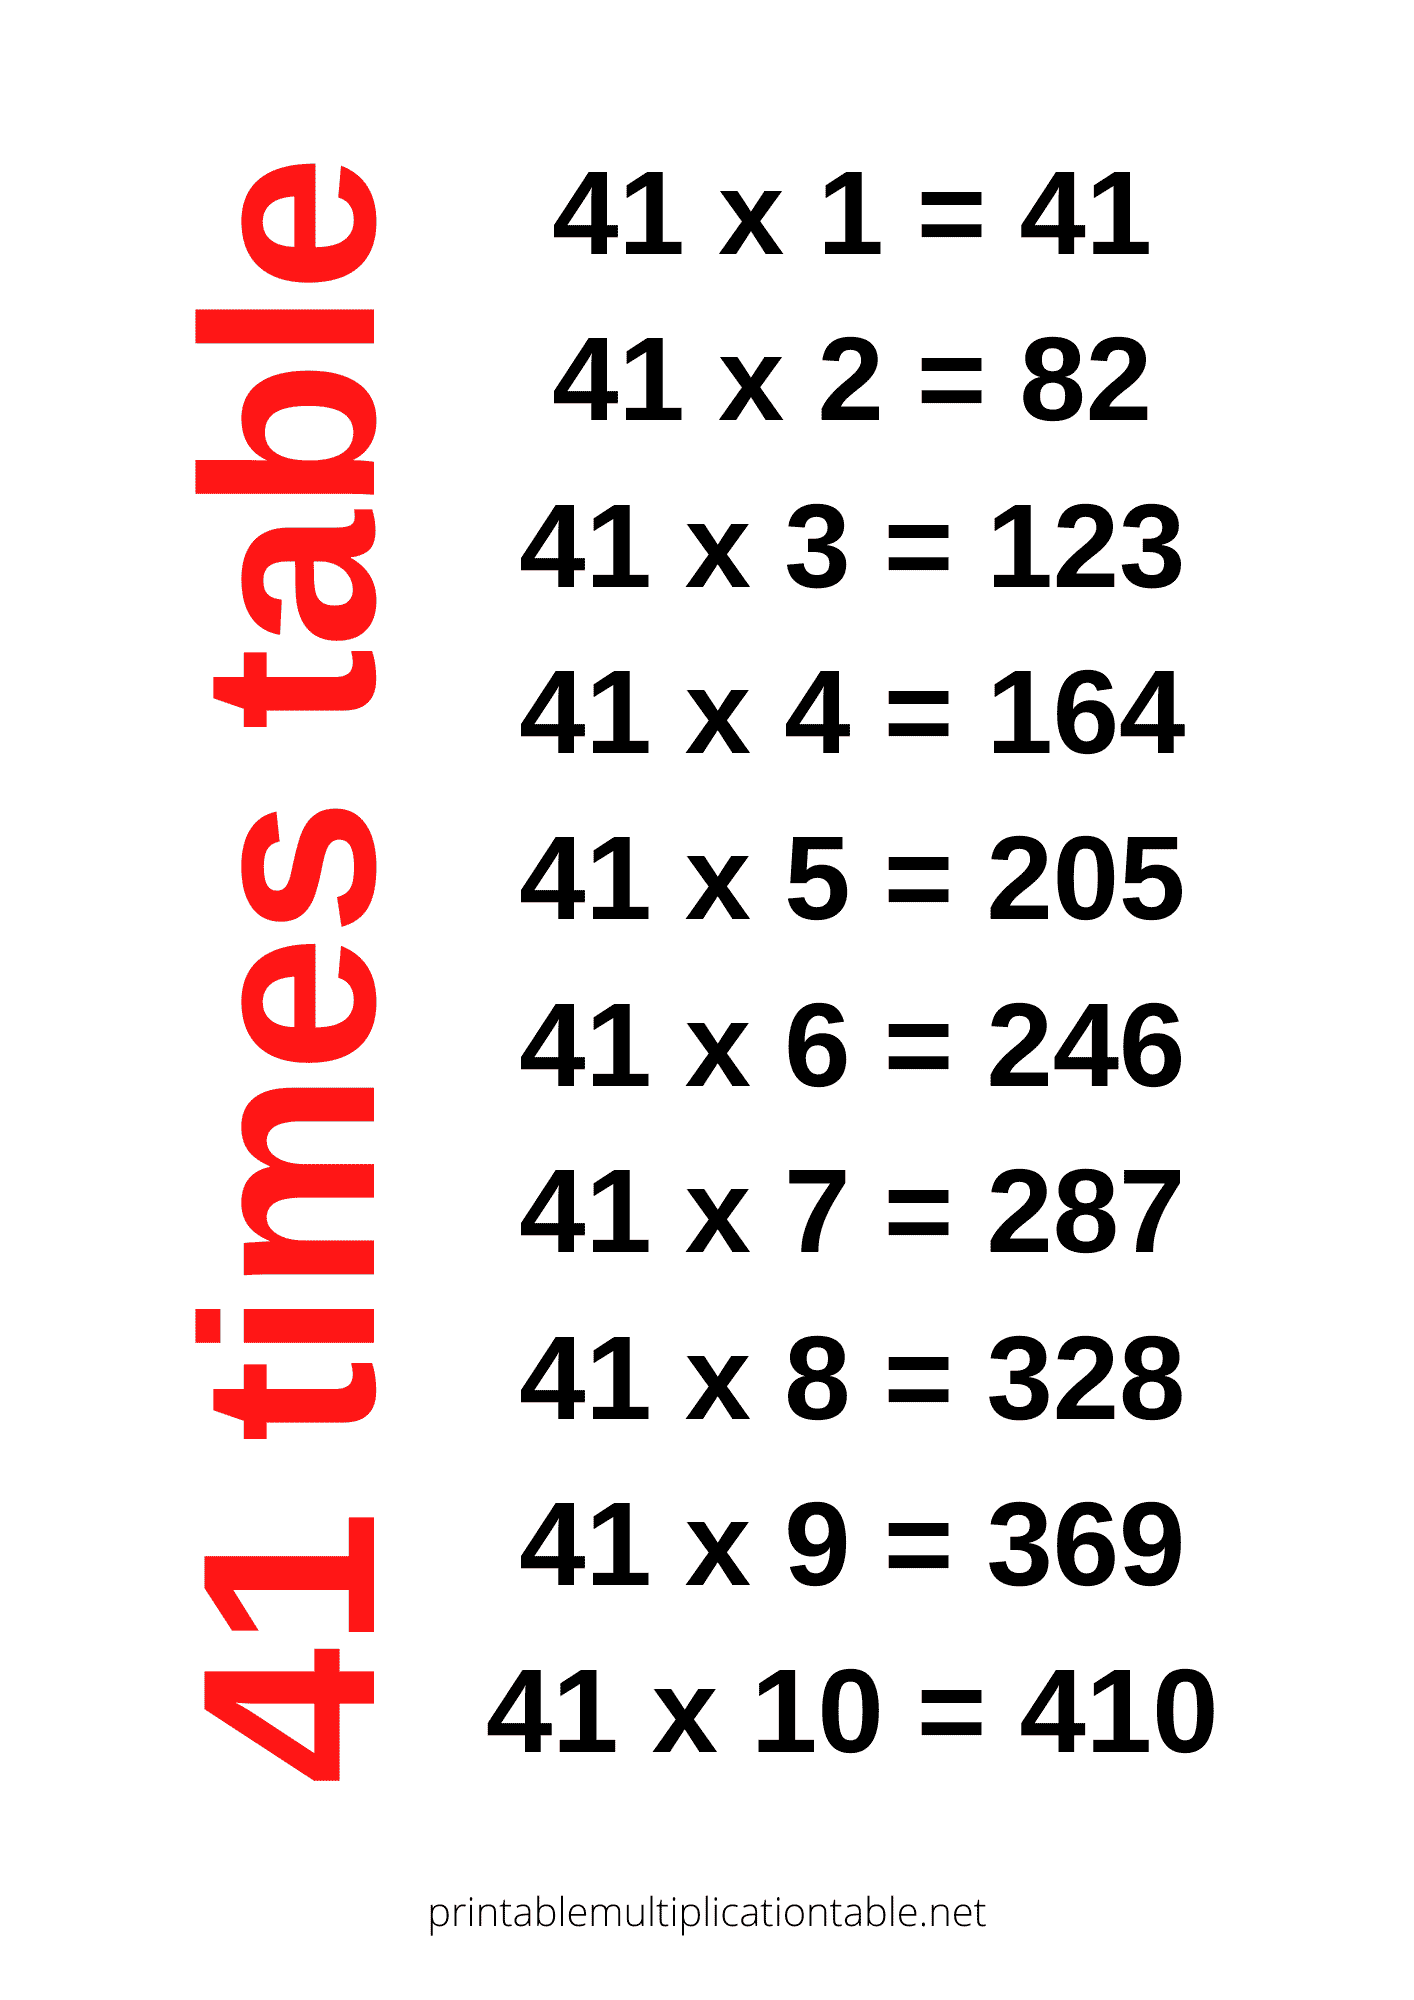 41 times table chart